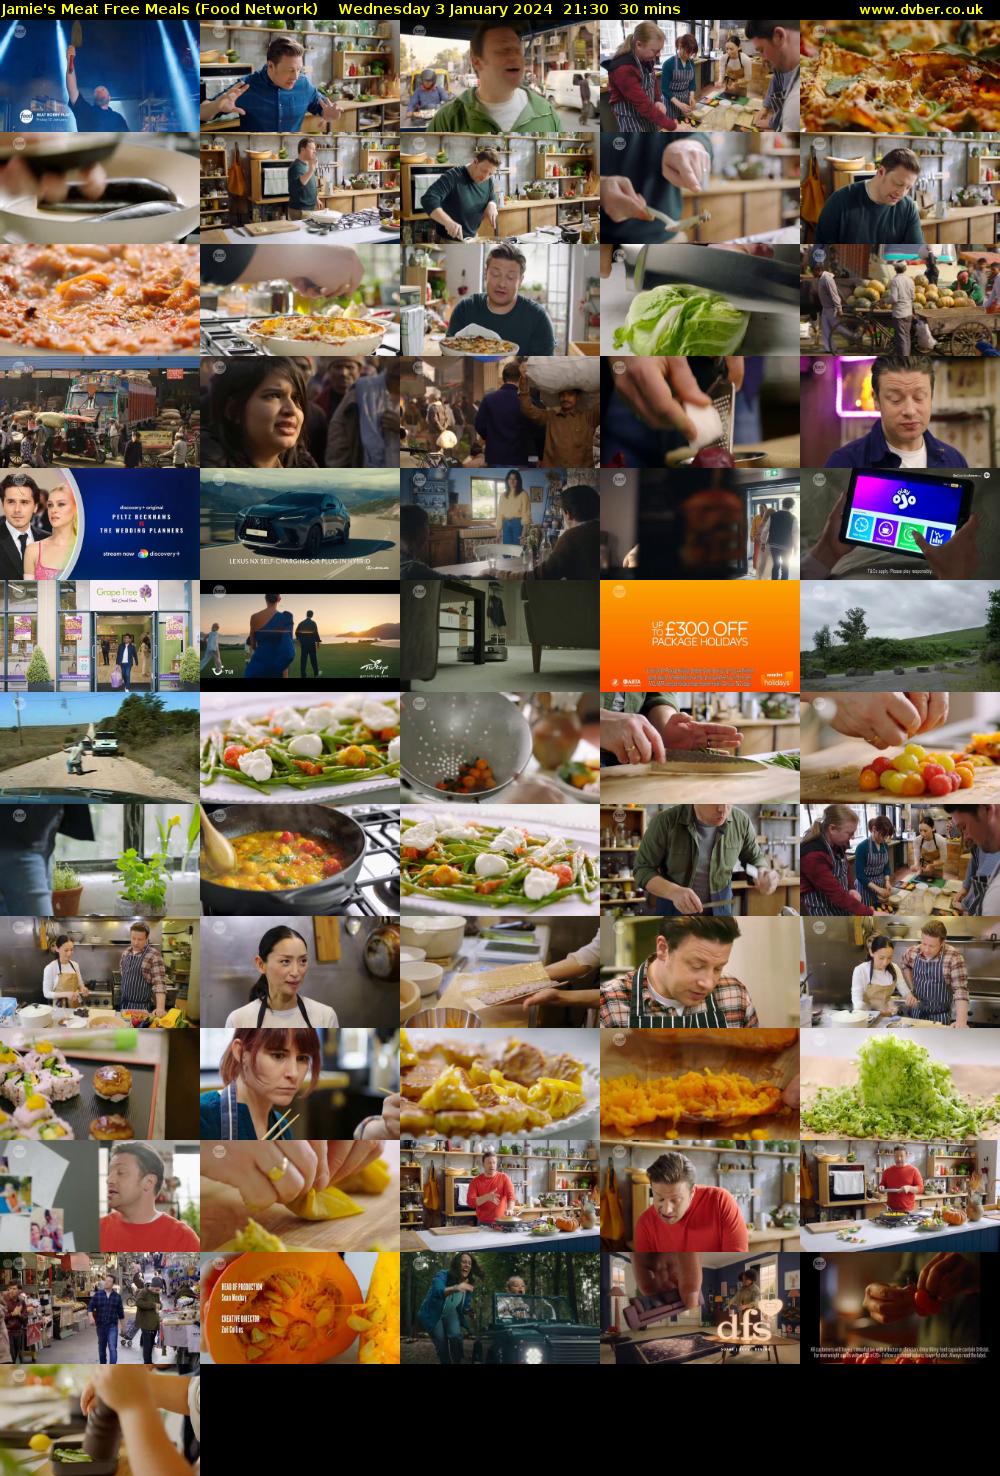 Jamie's Meat Free Meals (Food Network) Wednesday 3 January 2024 21:30 - 22:00